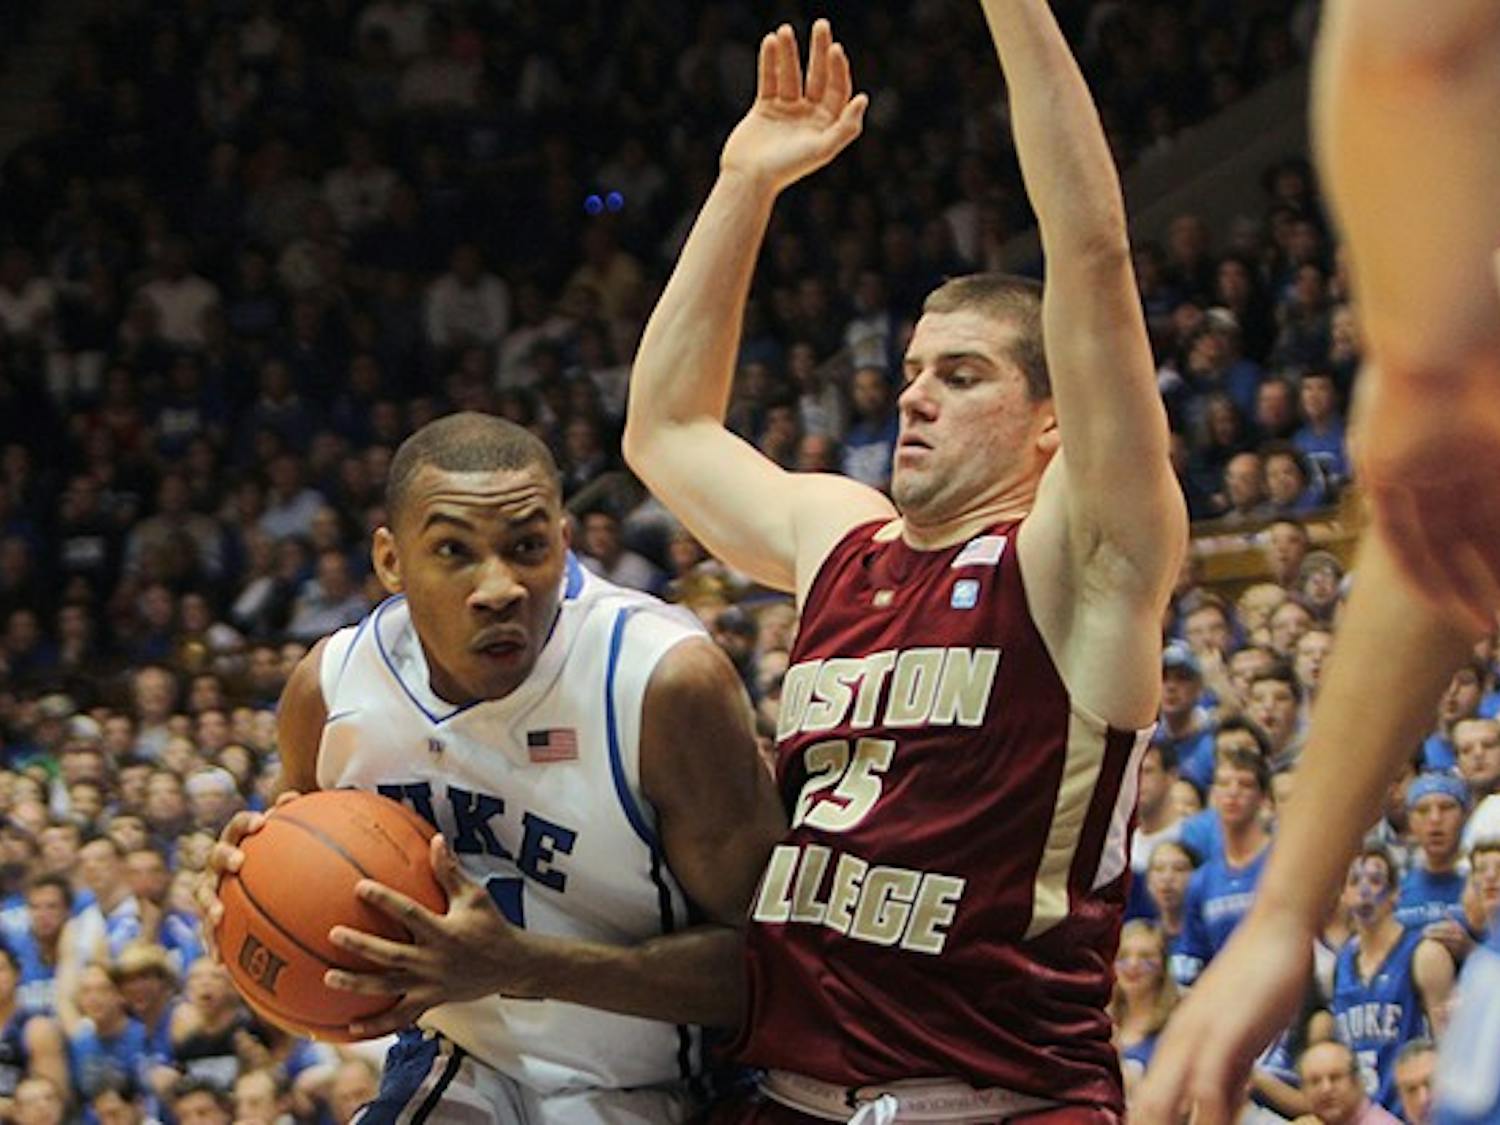 Rasheed Sulaimon scored a career-high 27 points, leading Duke to a 89-68 win against Boston College.